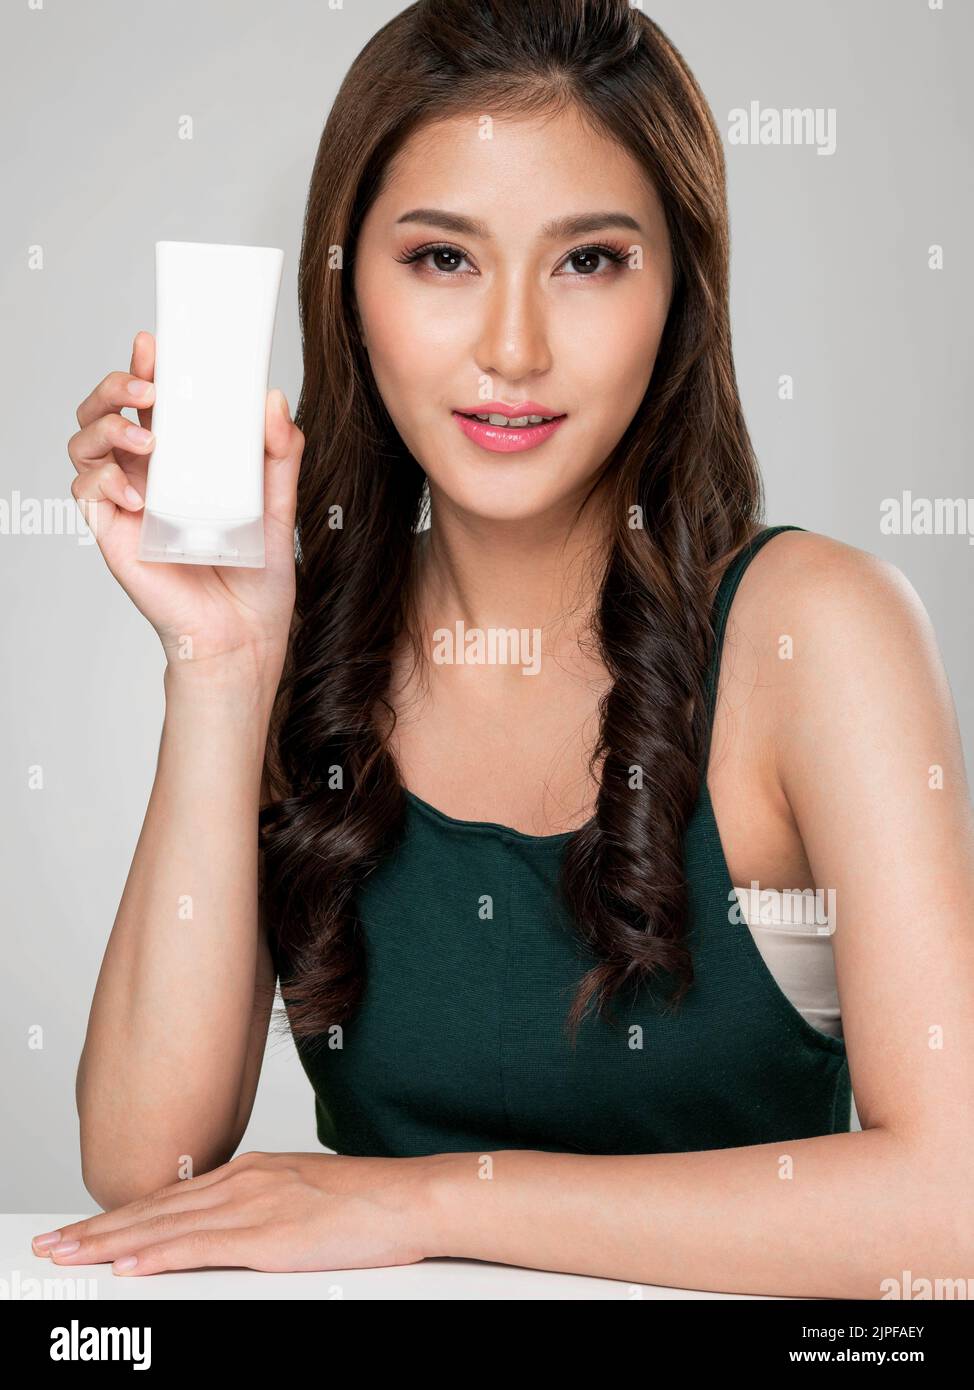 Closeup ardent woman smiling holding mockup product for advertising text place, light grey background. Concept of healthcare for skin, beauty care Stock Photo